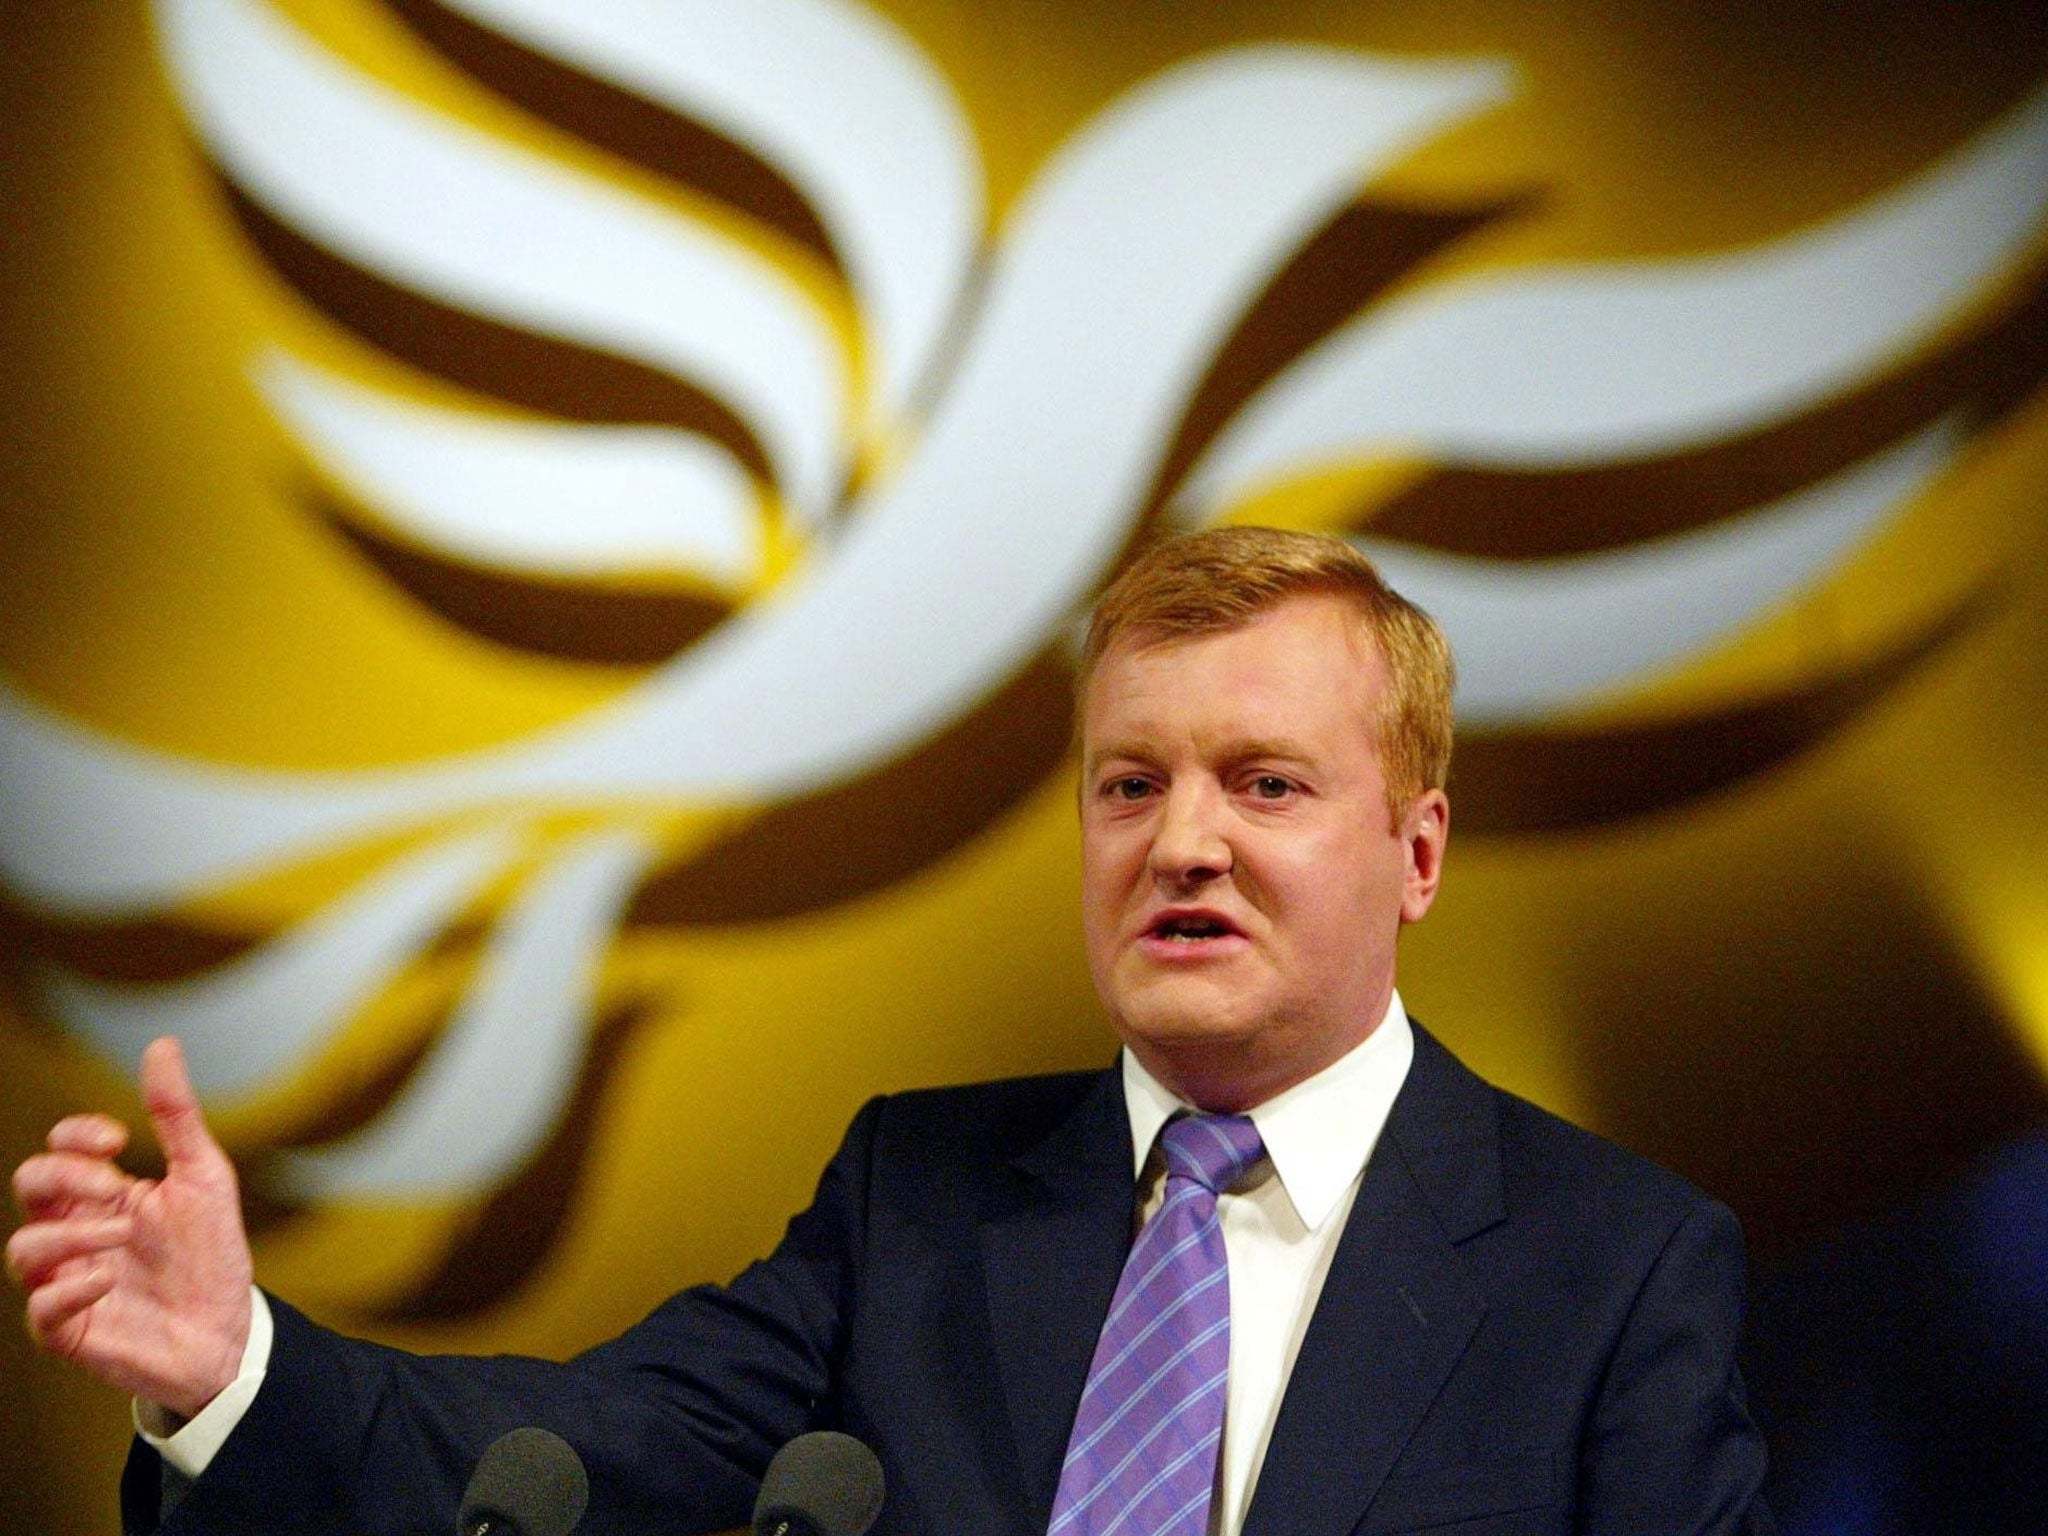 Kennedy delivering a speech the Liberal Democrat conference